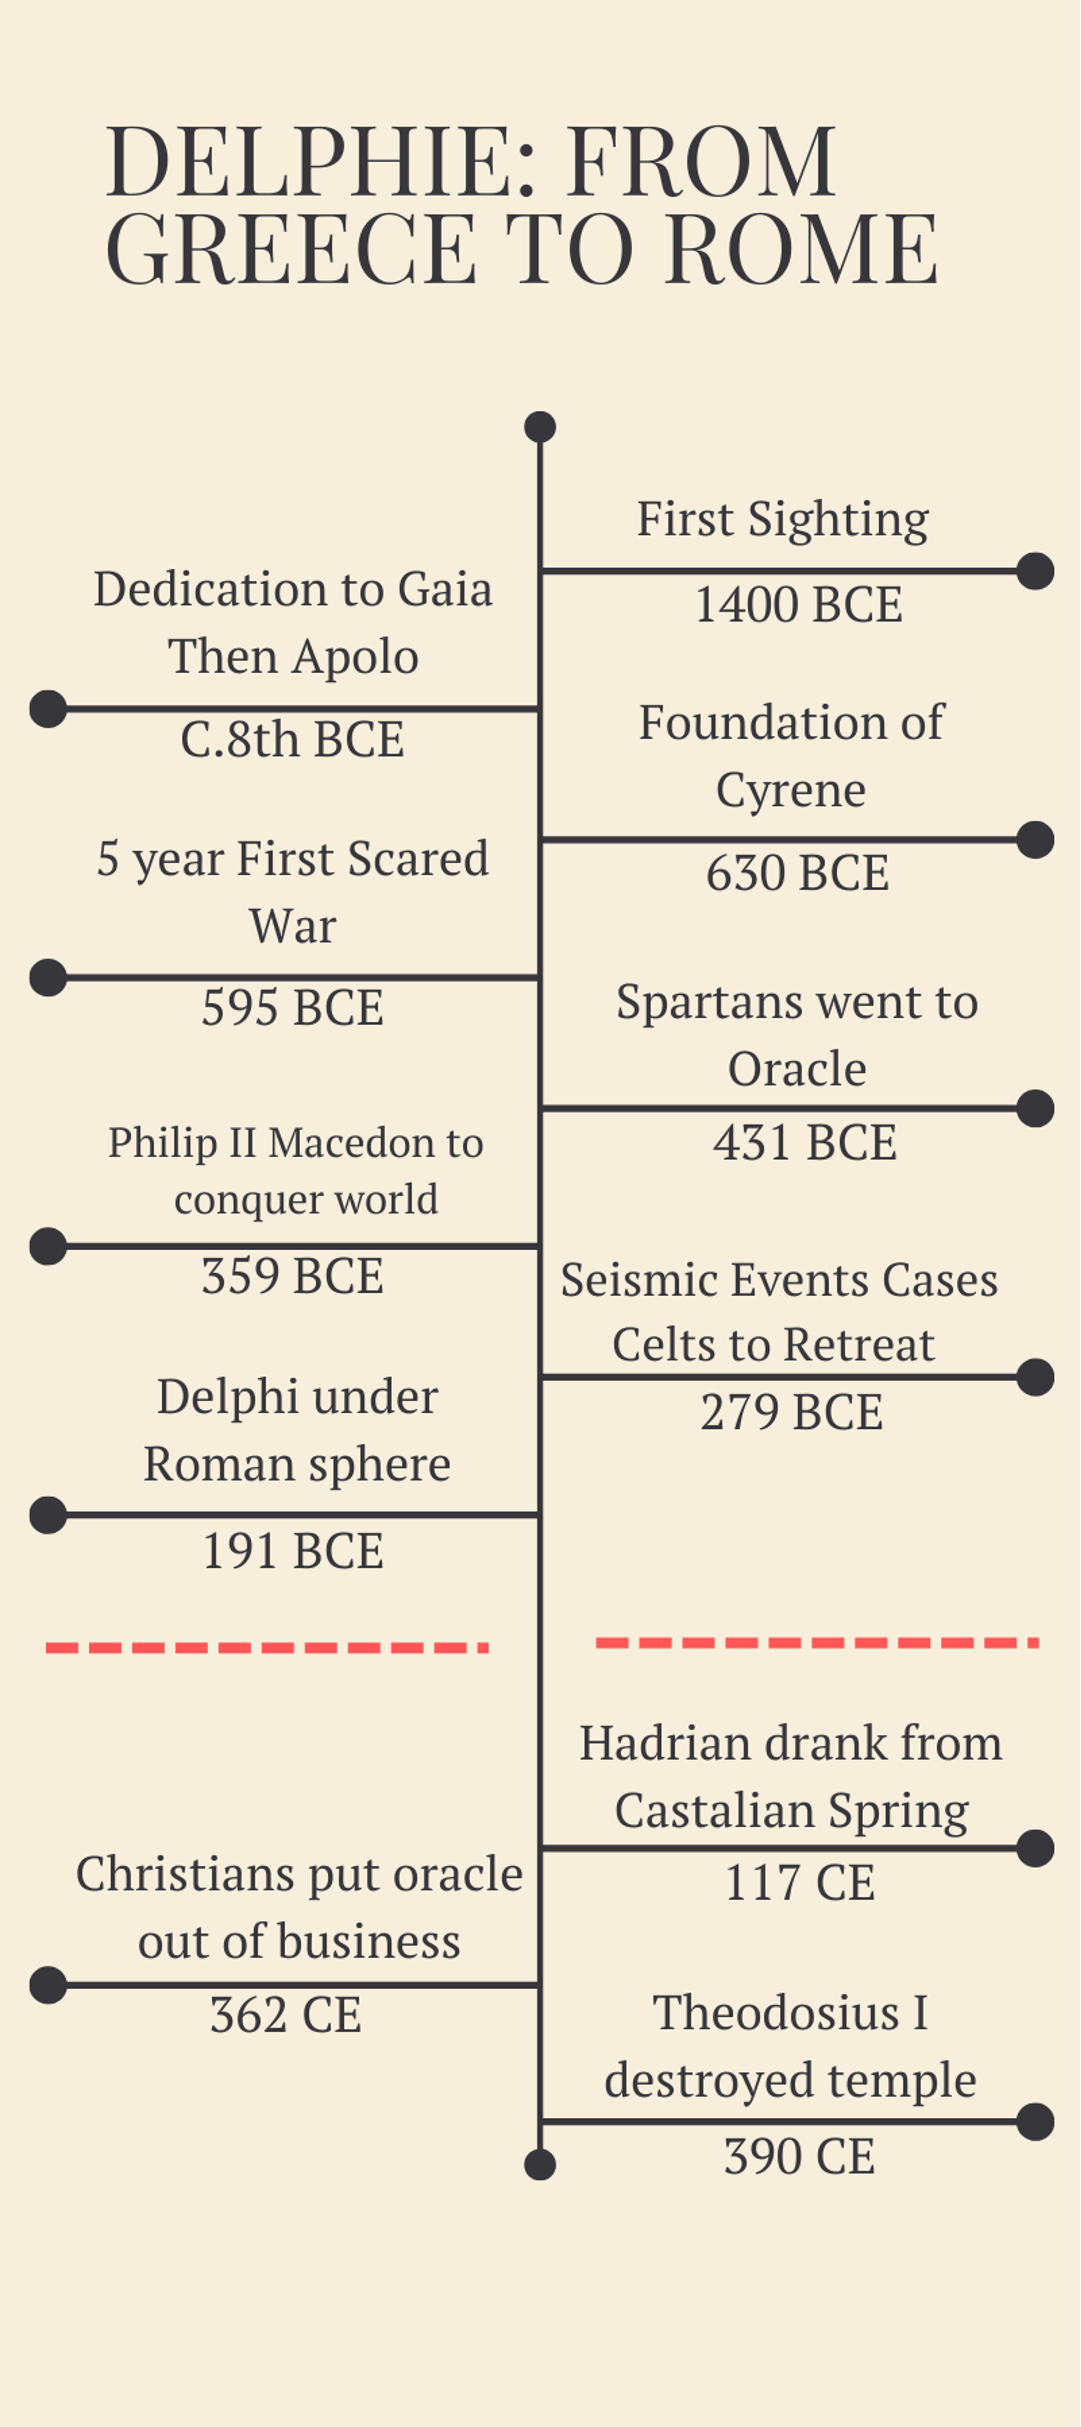 An infographic timeline of events related to Delphi. The timeline is vertical and has a beige background. The timeline is divided into two columns, one for events related to Greece and the other for events related to Rome. The events are marked with black lines and text.